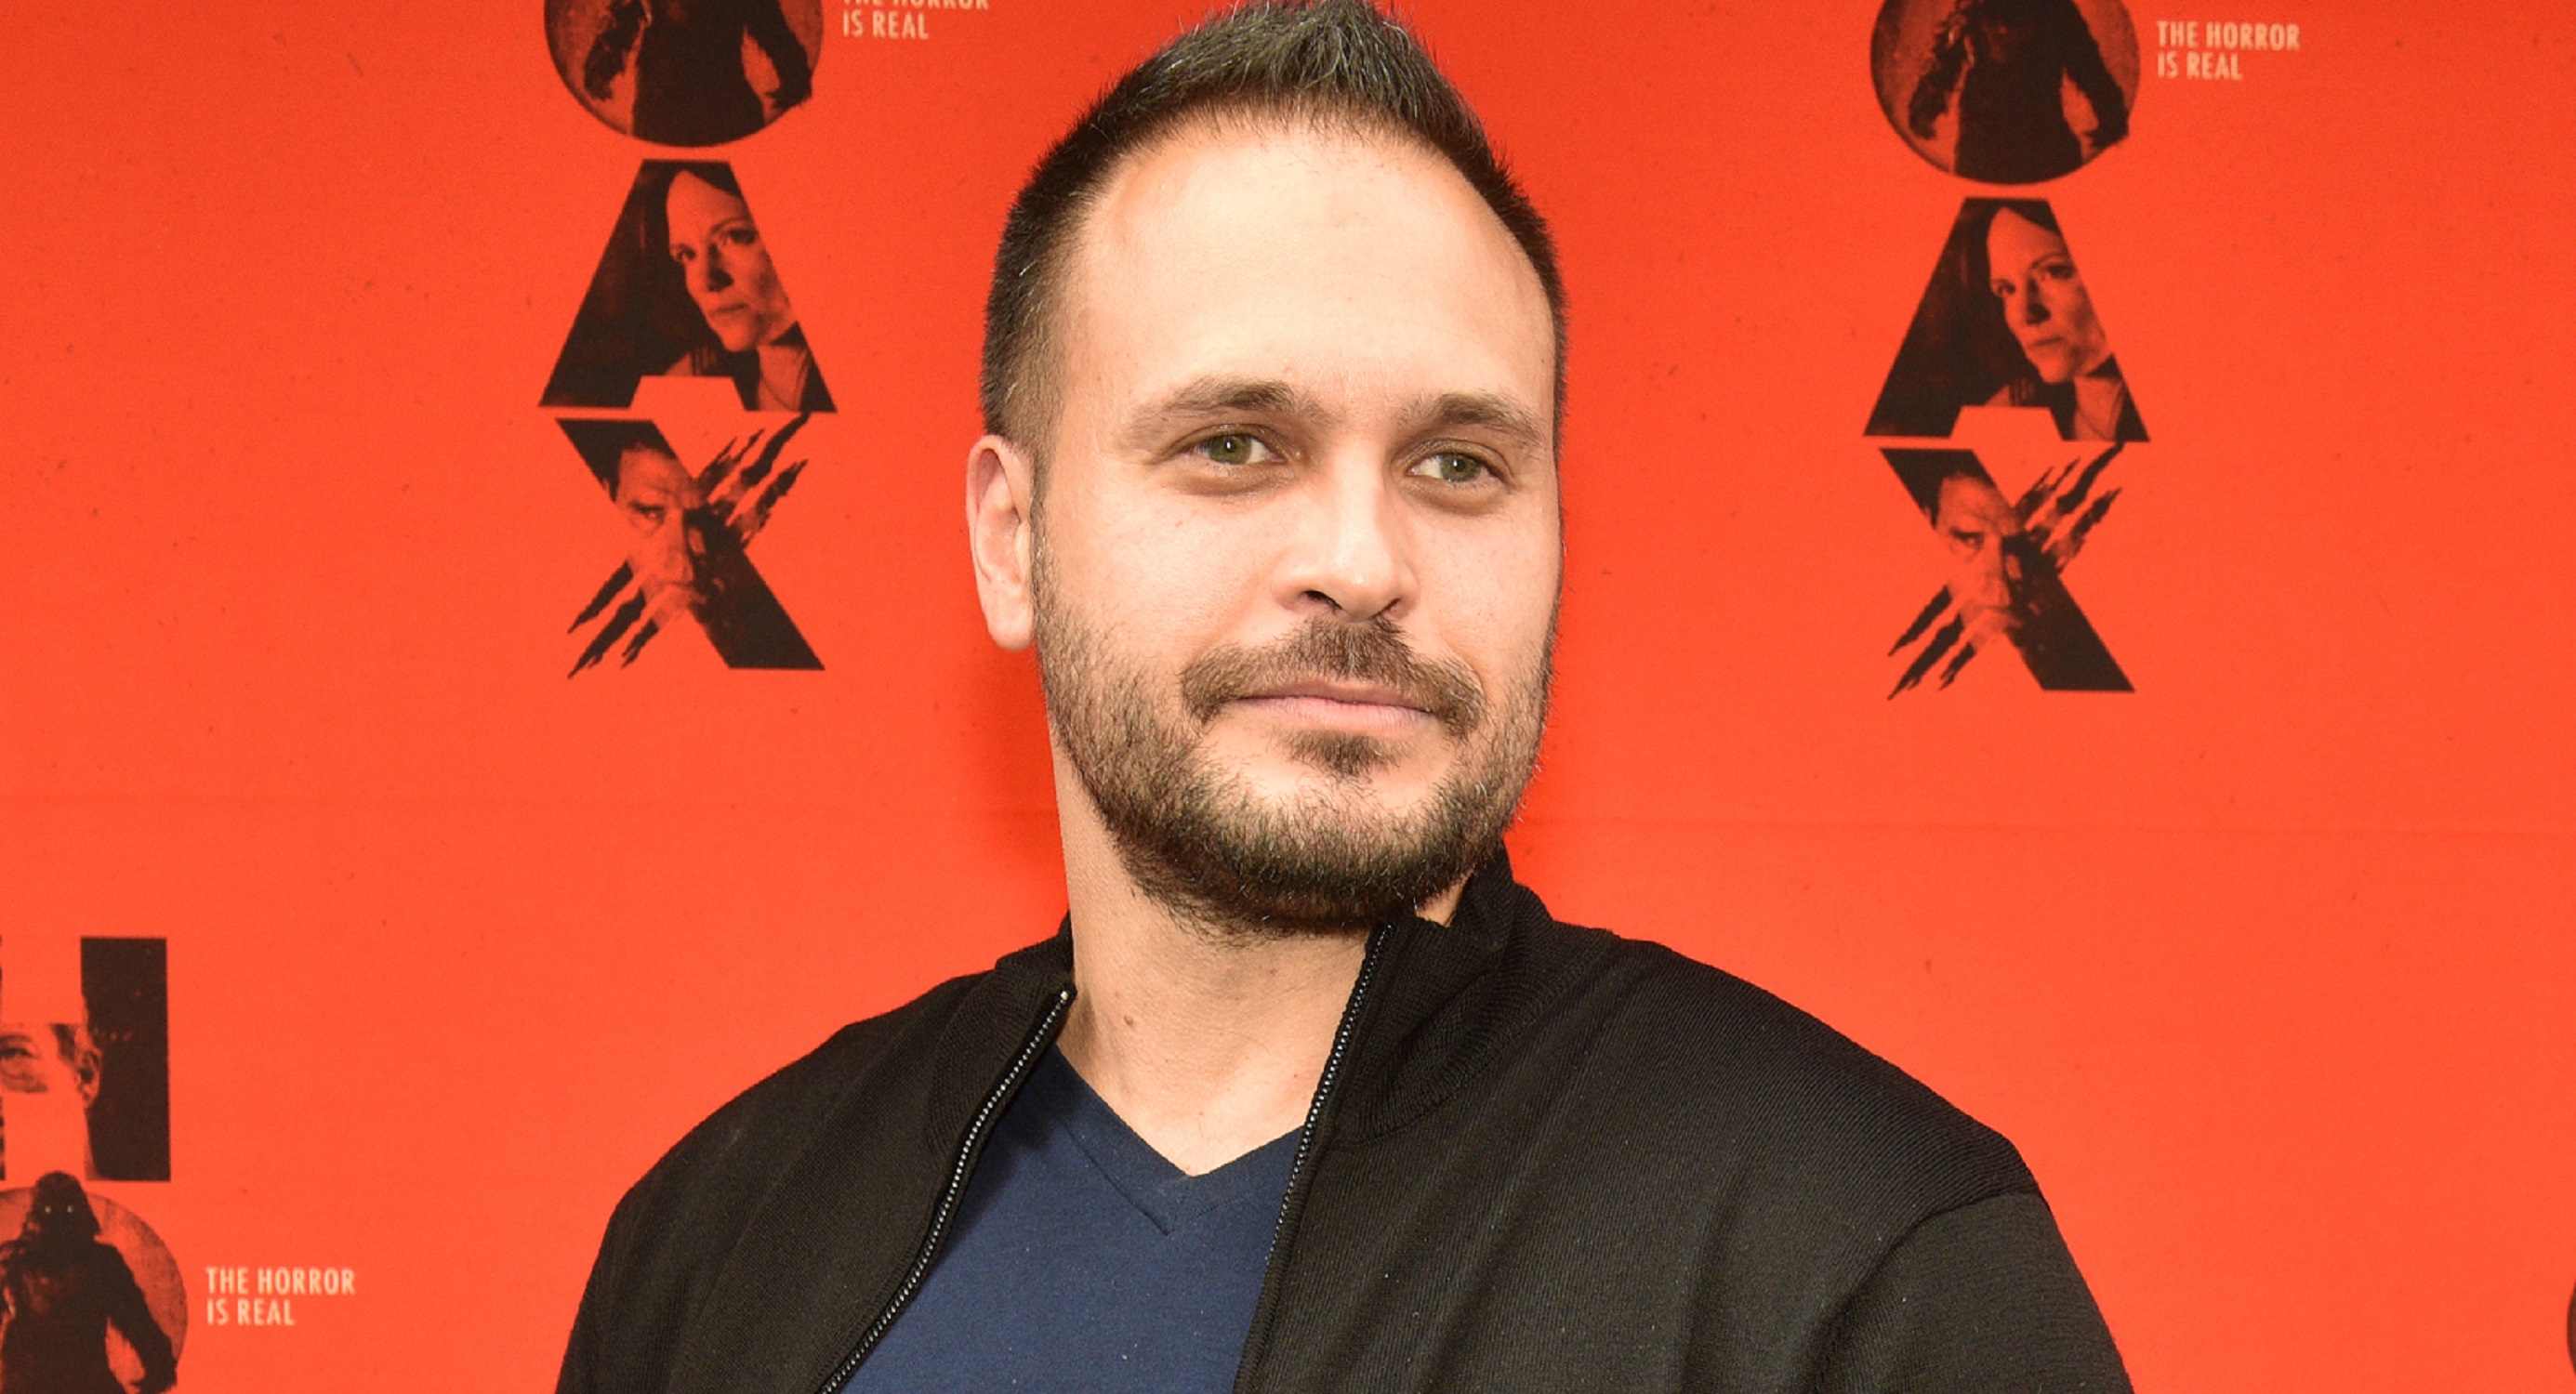 General Hospital comings and goings focus on Max Decker, pictured here in a blue shirt and black jacket against a red background